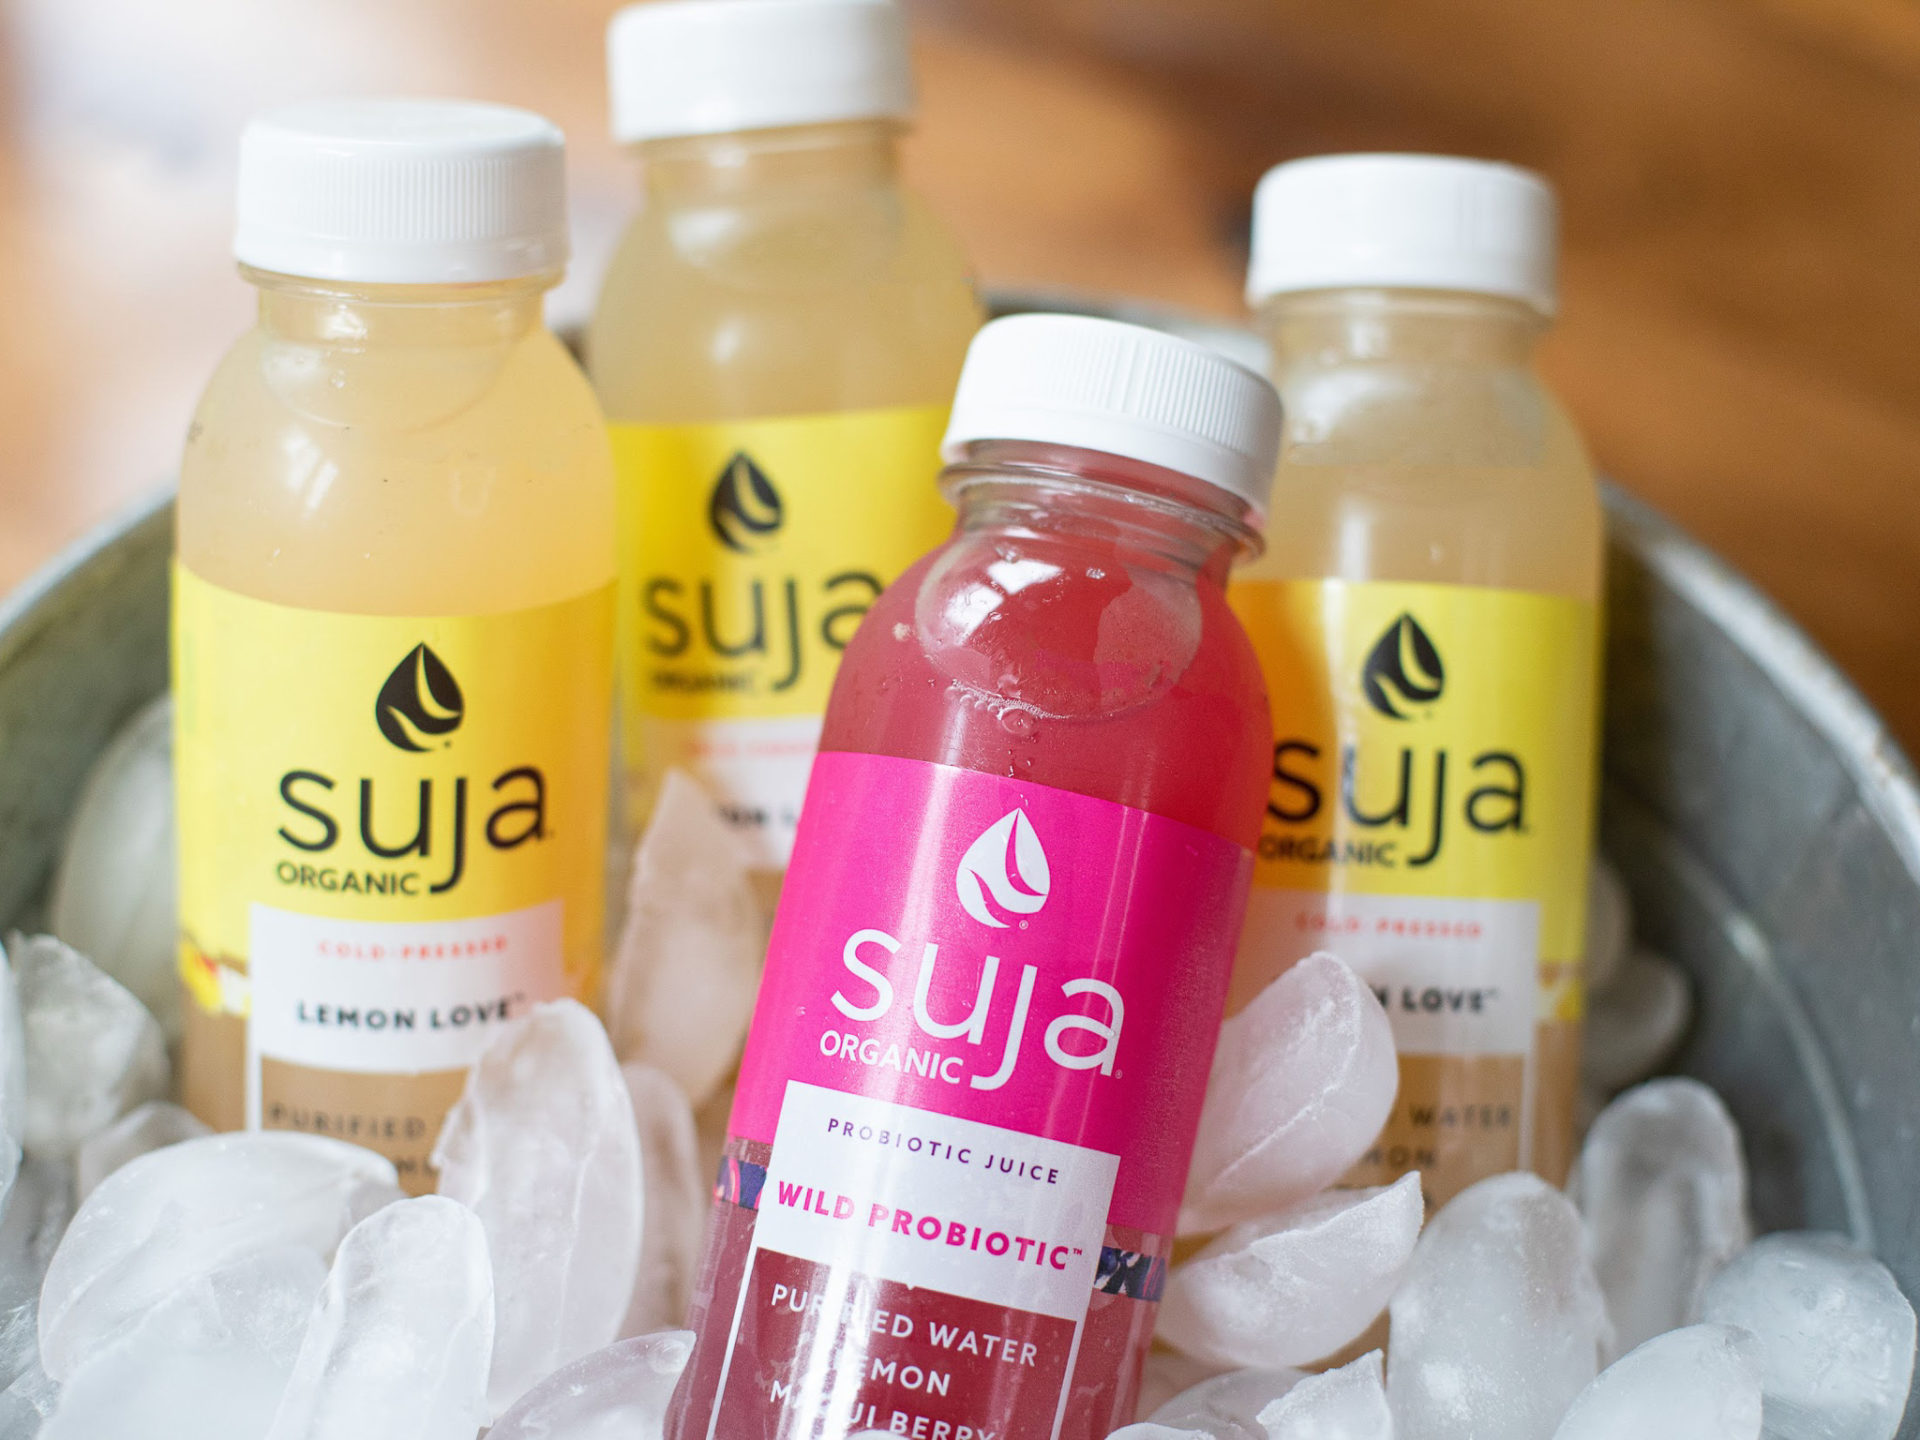 Get Suja Cold-Pressed Juice Or Shots For As Low As $1.13 At Kroger